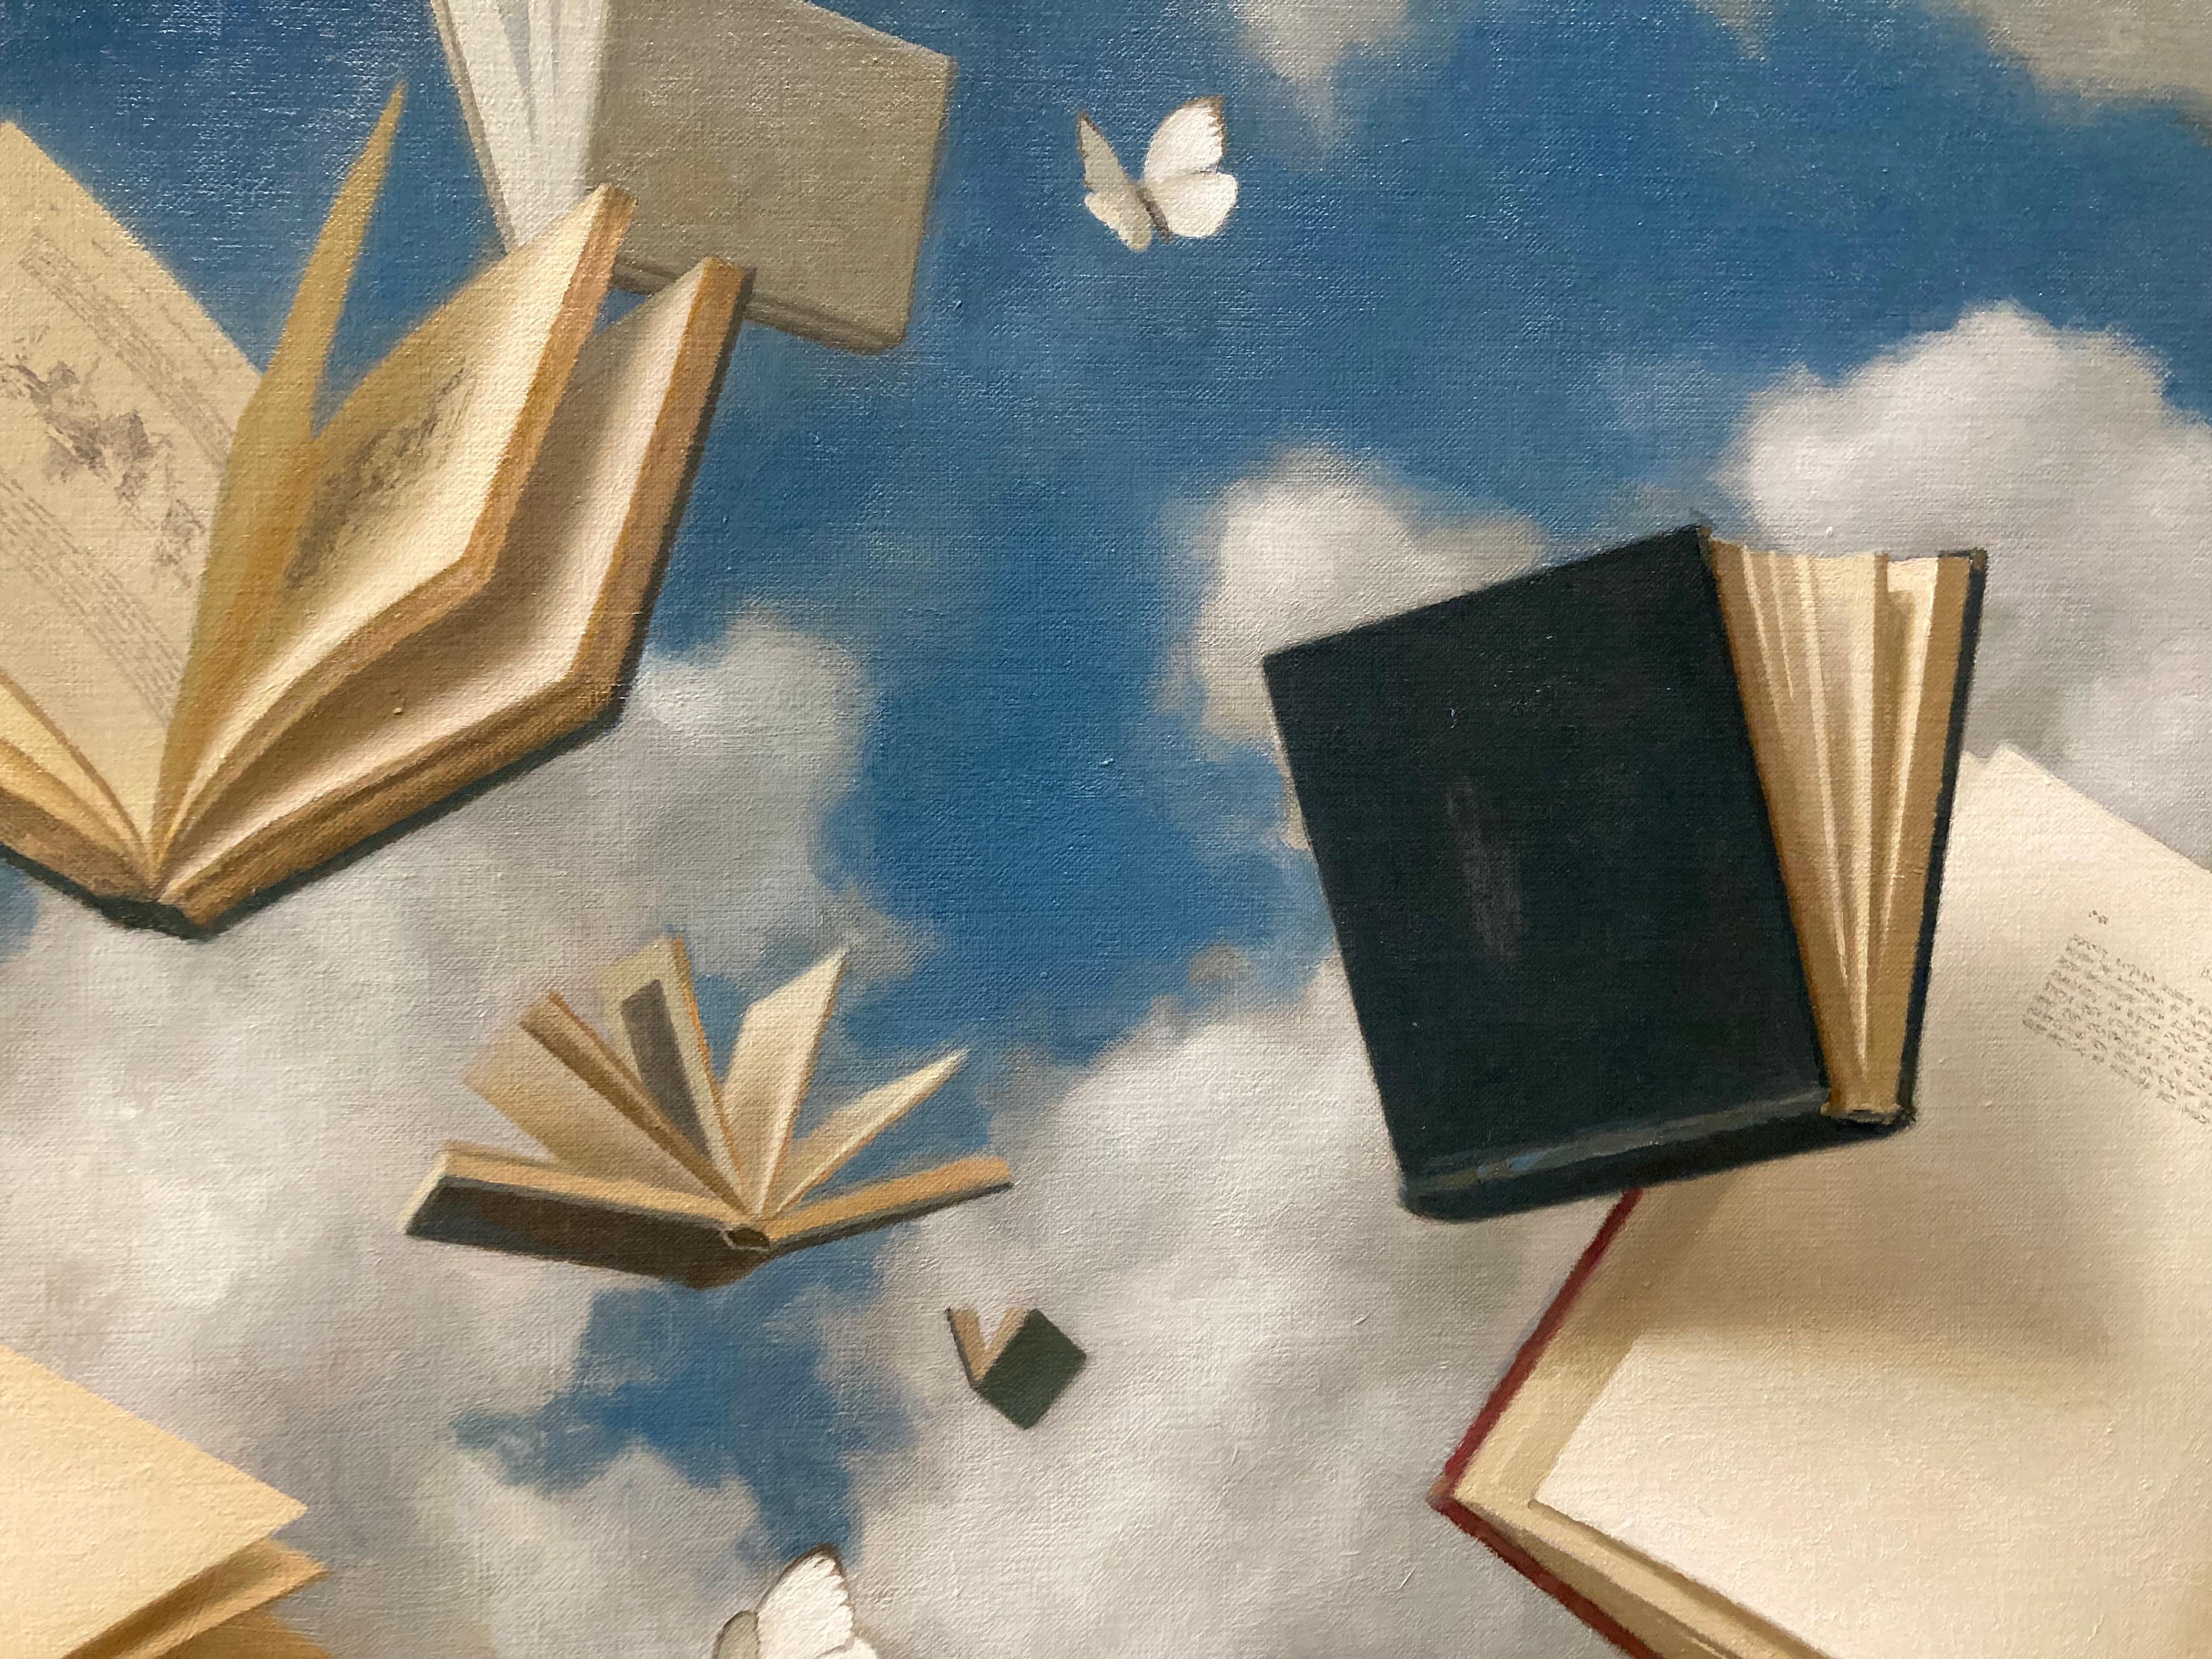 Floating Books and Butterflies - 2023 Surrealist still life and skyscape 10